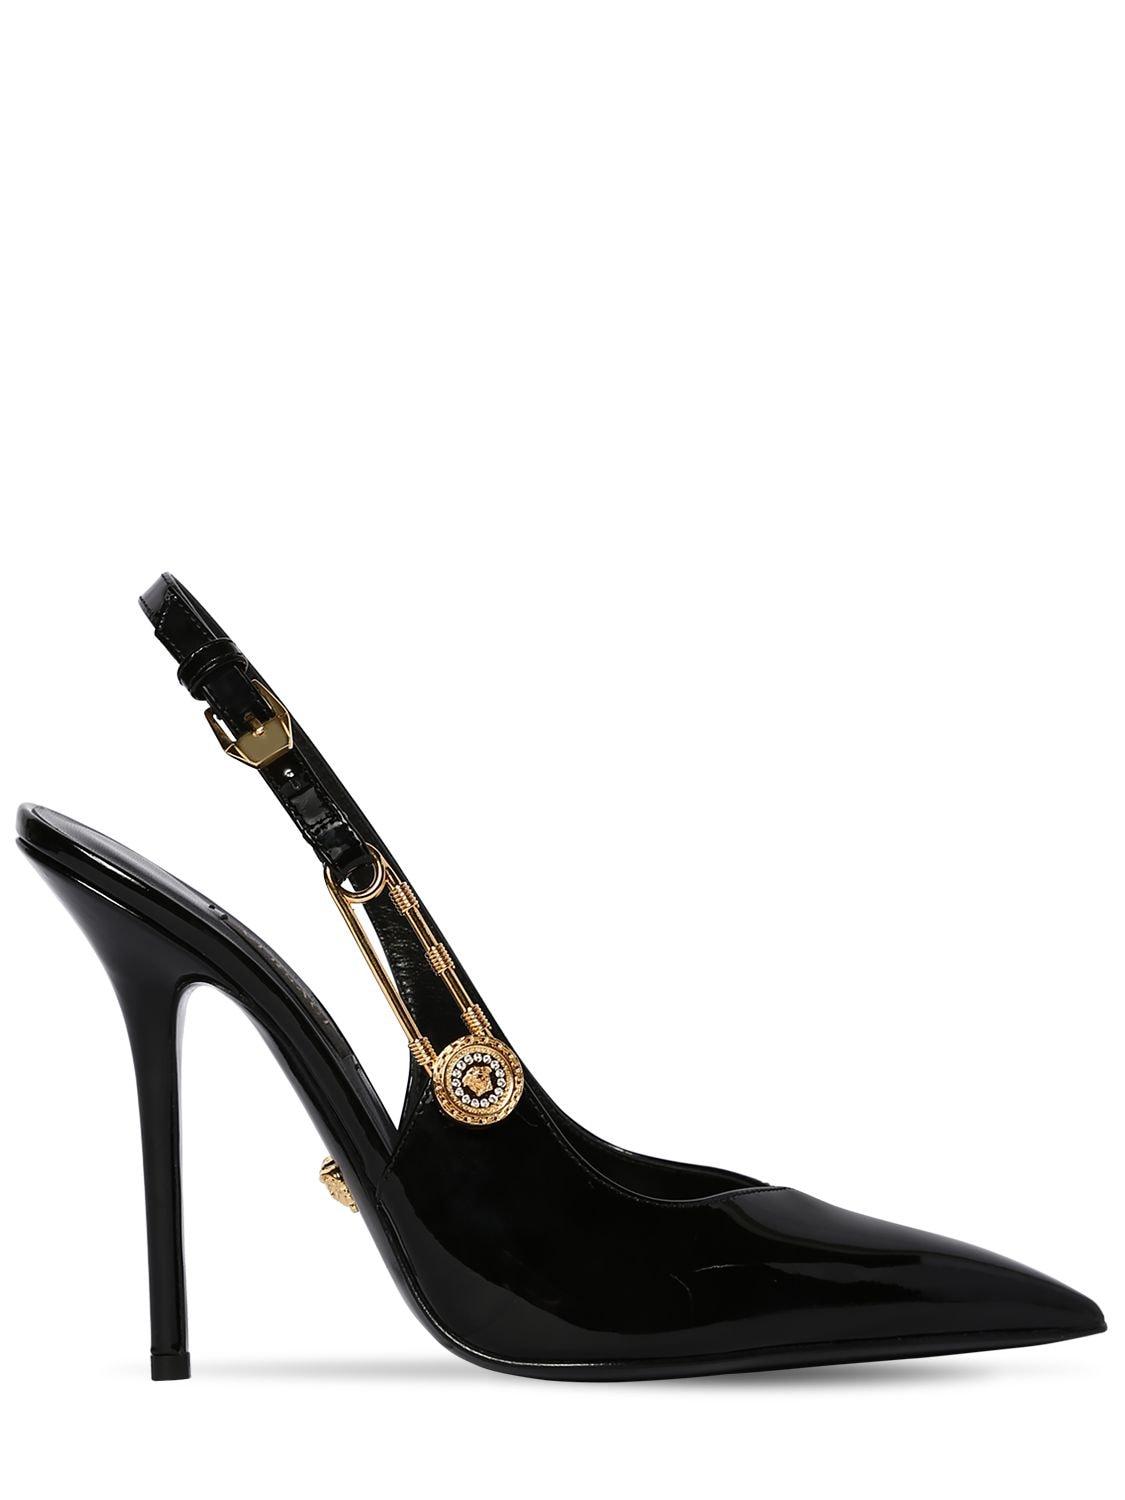 Versace 110mm Patent Leather Sling Back Pumps in Black - Lyst